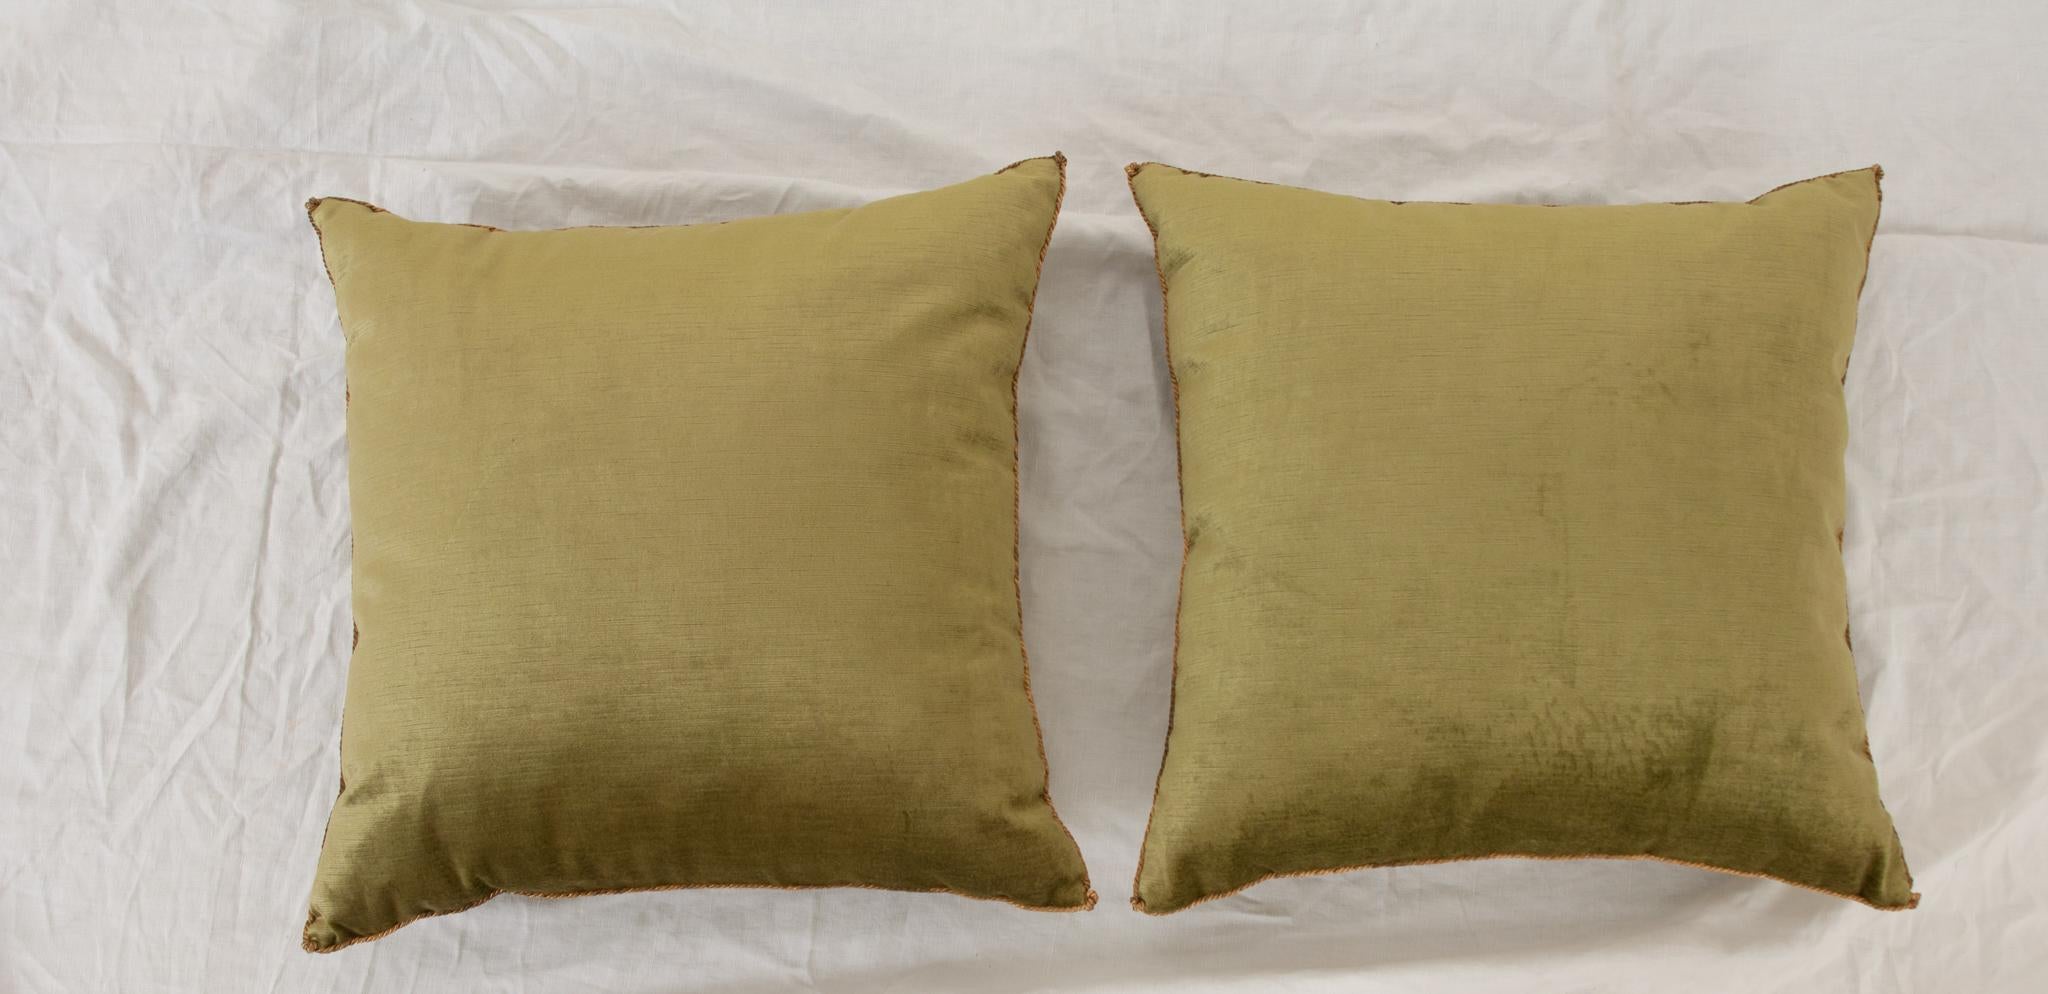 A pair of beautiful two-tone velvet pillows. Hand trimmed and features vintage gold metallic cording, knotted in the corners. Designed by Rebecca Vizard for B. Viz Design. Sold as a pair only. Be sure to take a look at the detailed images to see the